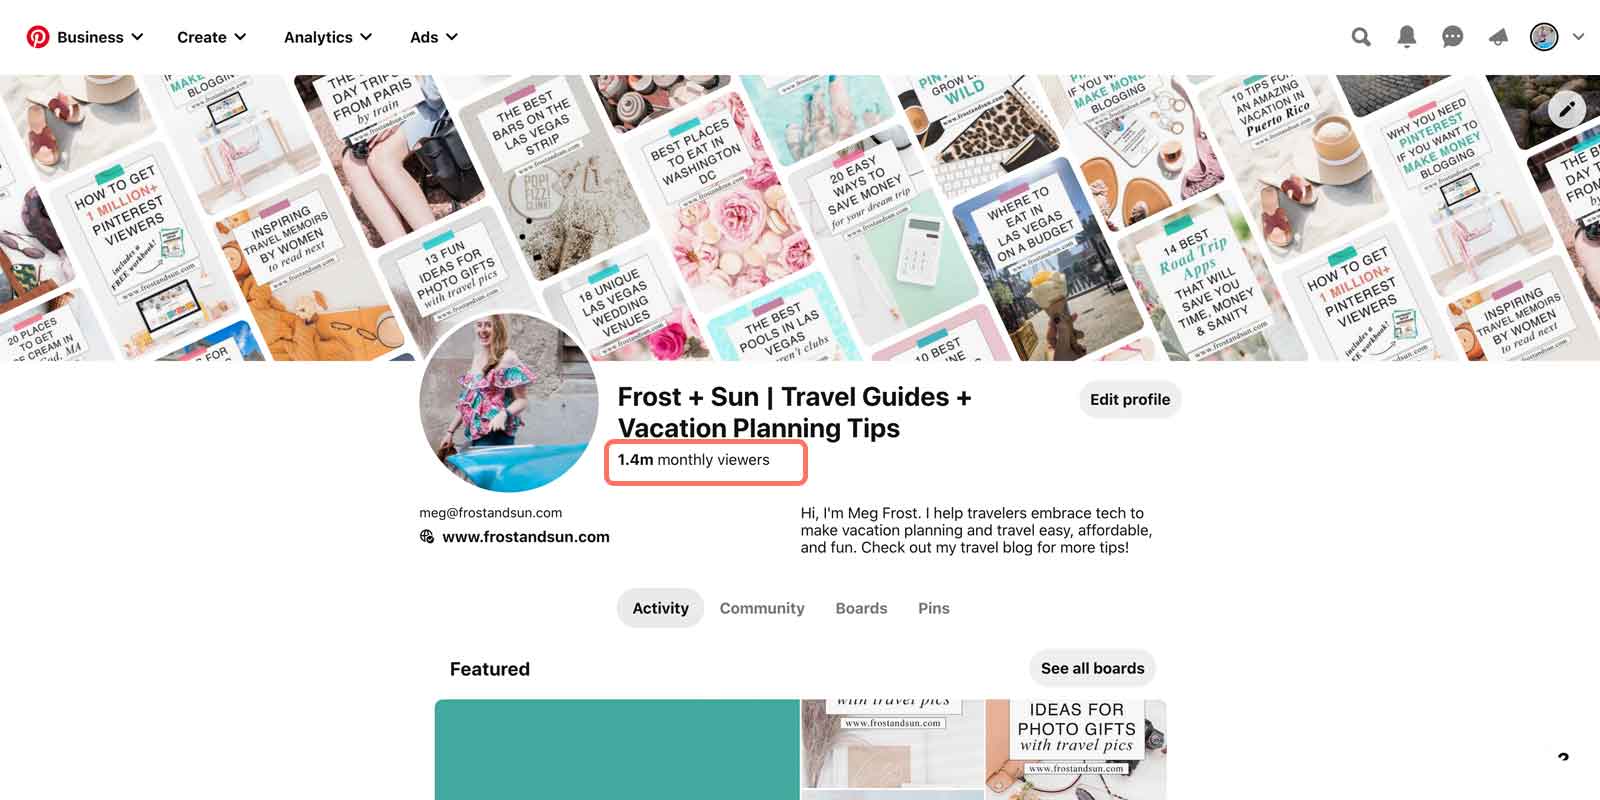 Screenshot of the Pinterest profile page for user frostxsun. A statistic that says "1.4 million monthly viewers" is circled.